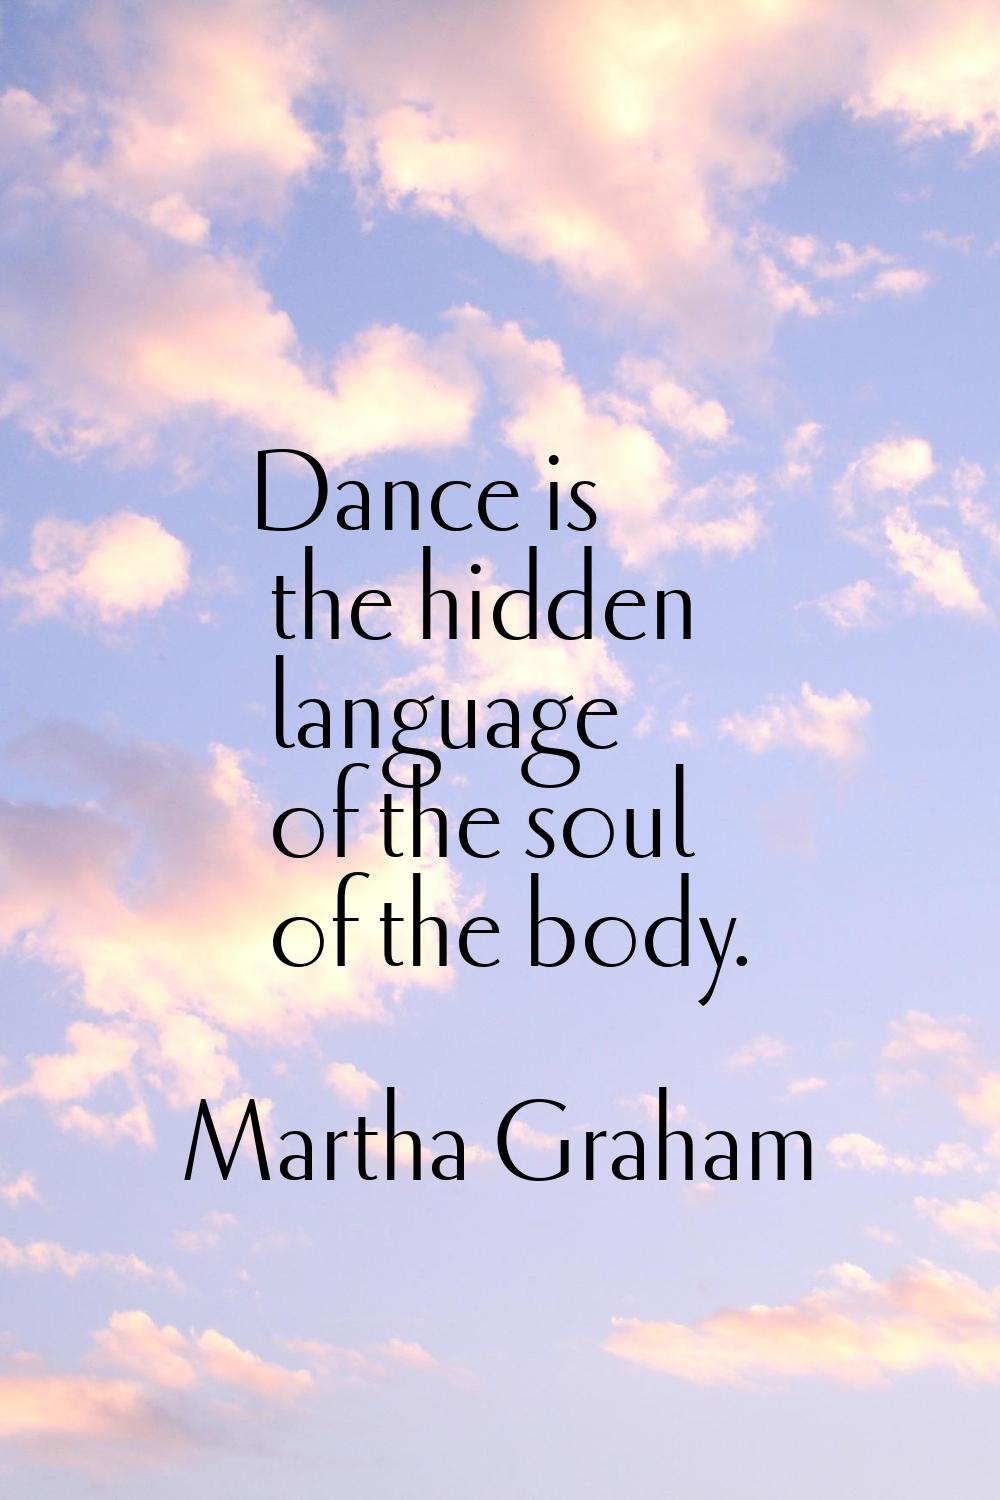 Dance is the hidden language of the soul of the body.